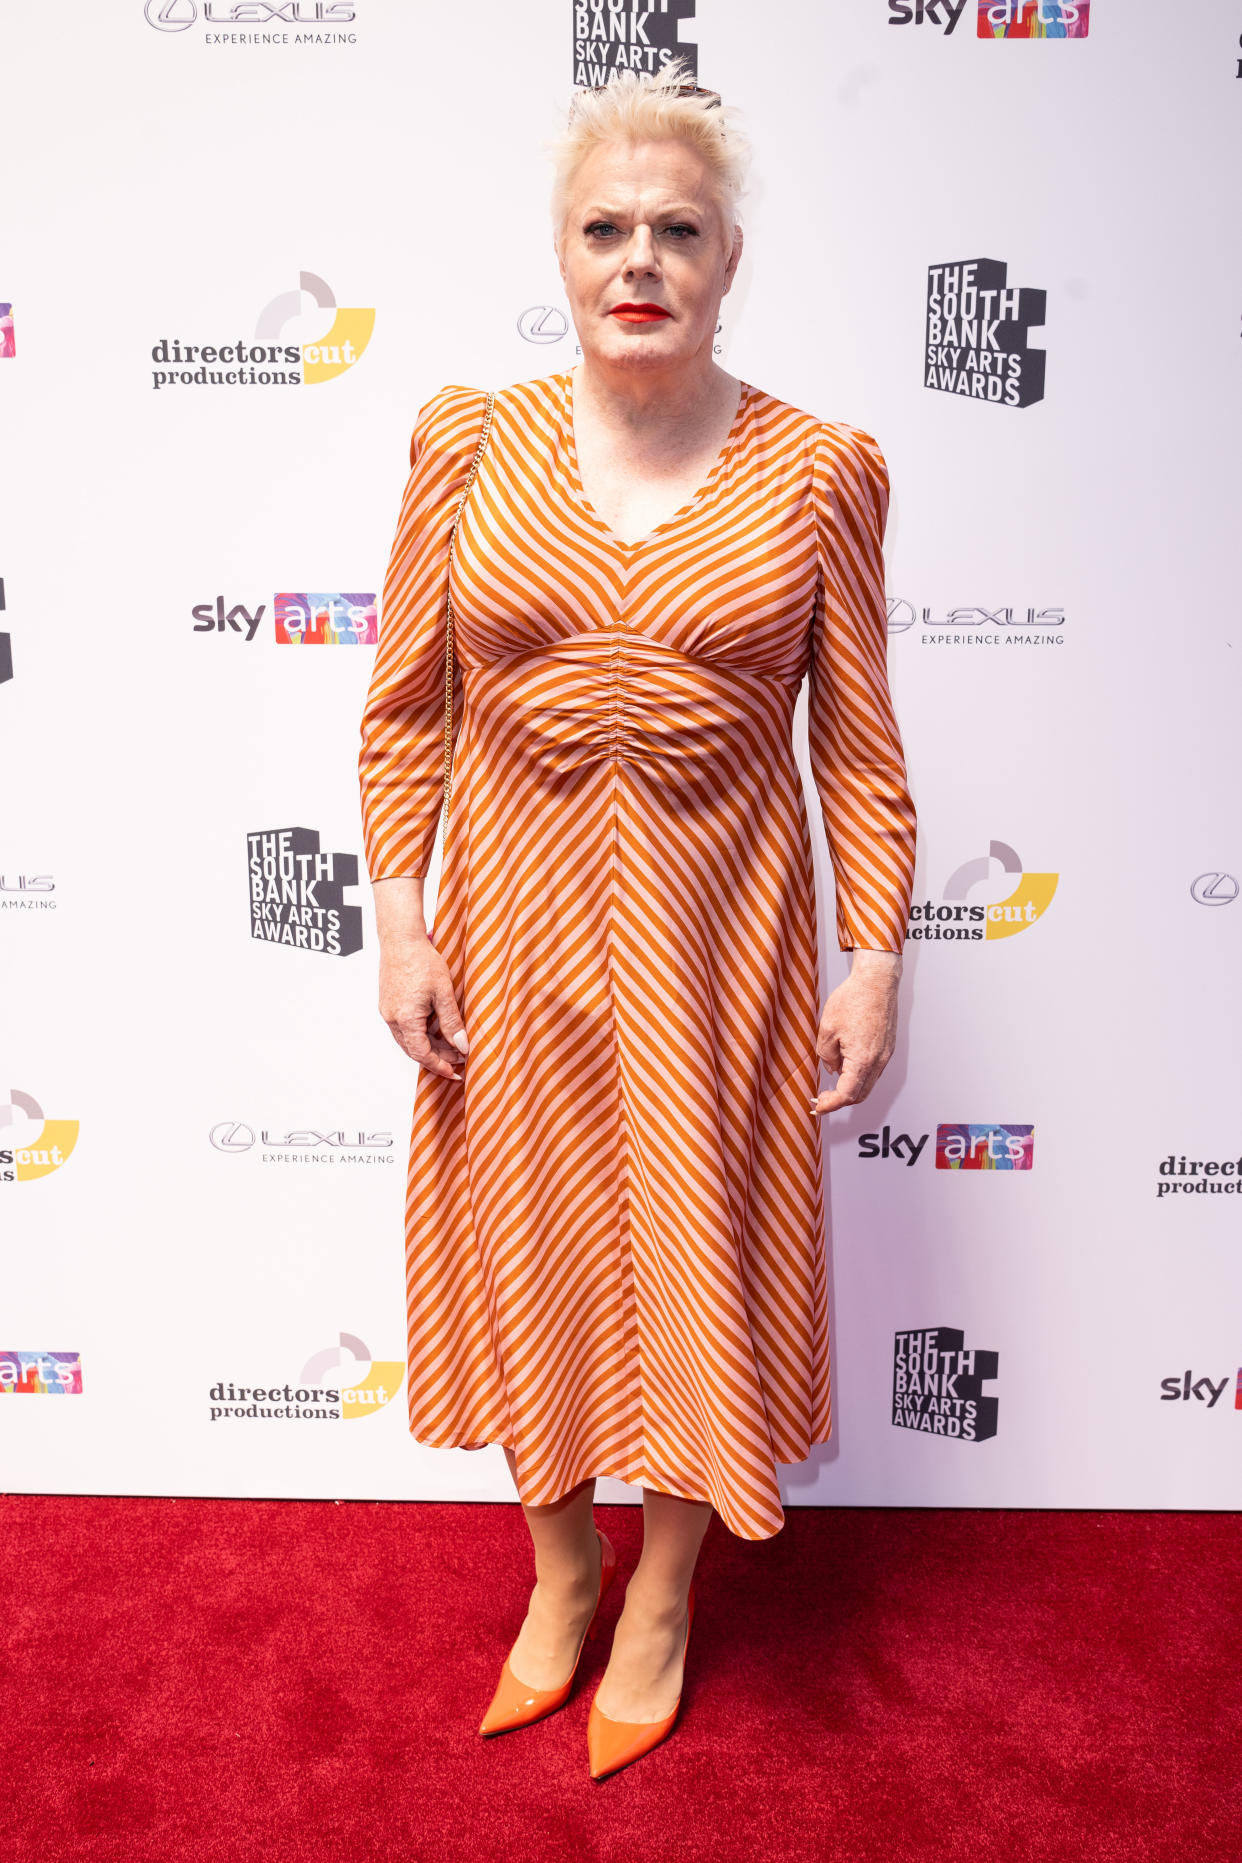 Eddie Izzard attends The South Bank Sky Arts Awards 2022 in heels and a fitted vintage-style frock.